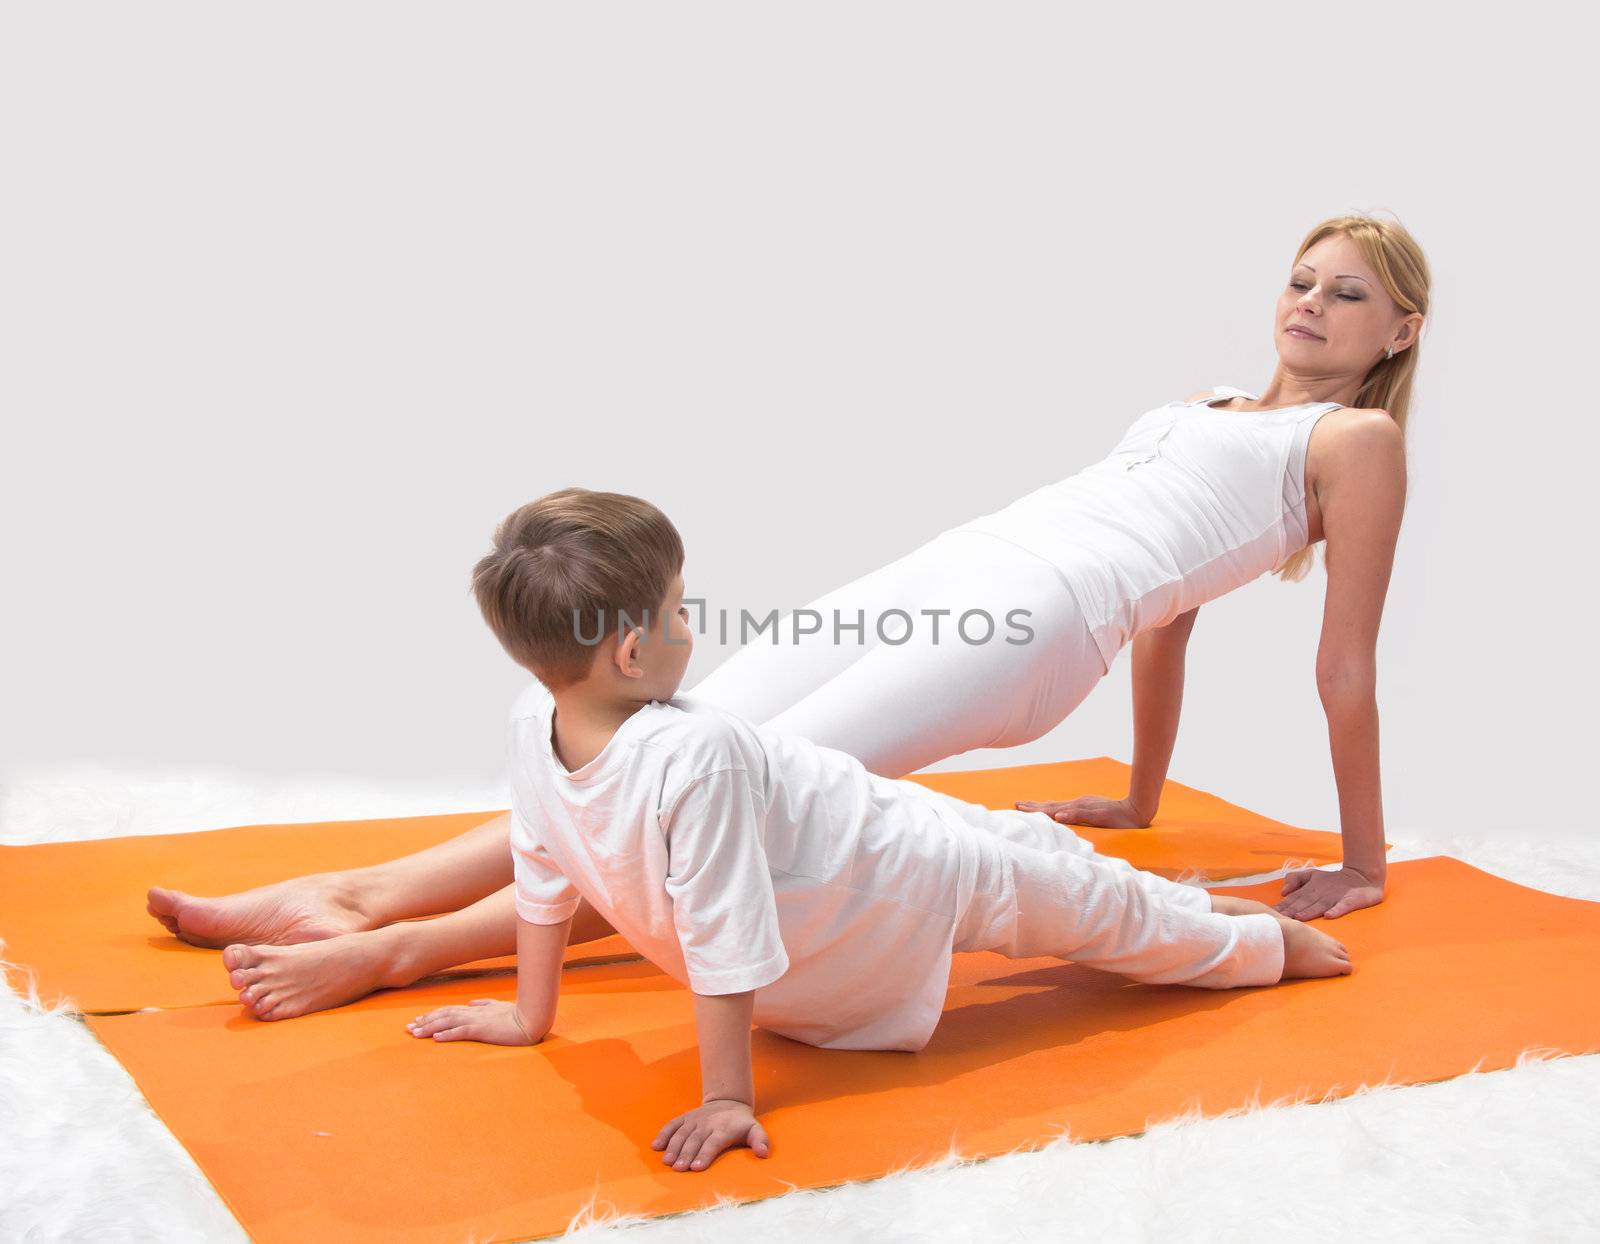 A beautiful young mother practices yoga with her son  by NickNick